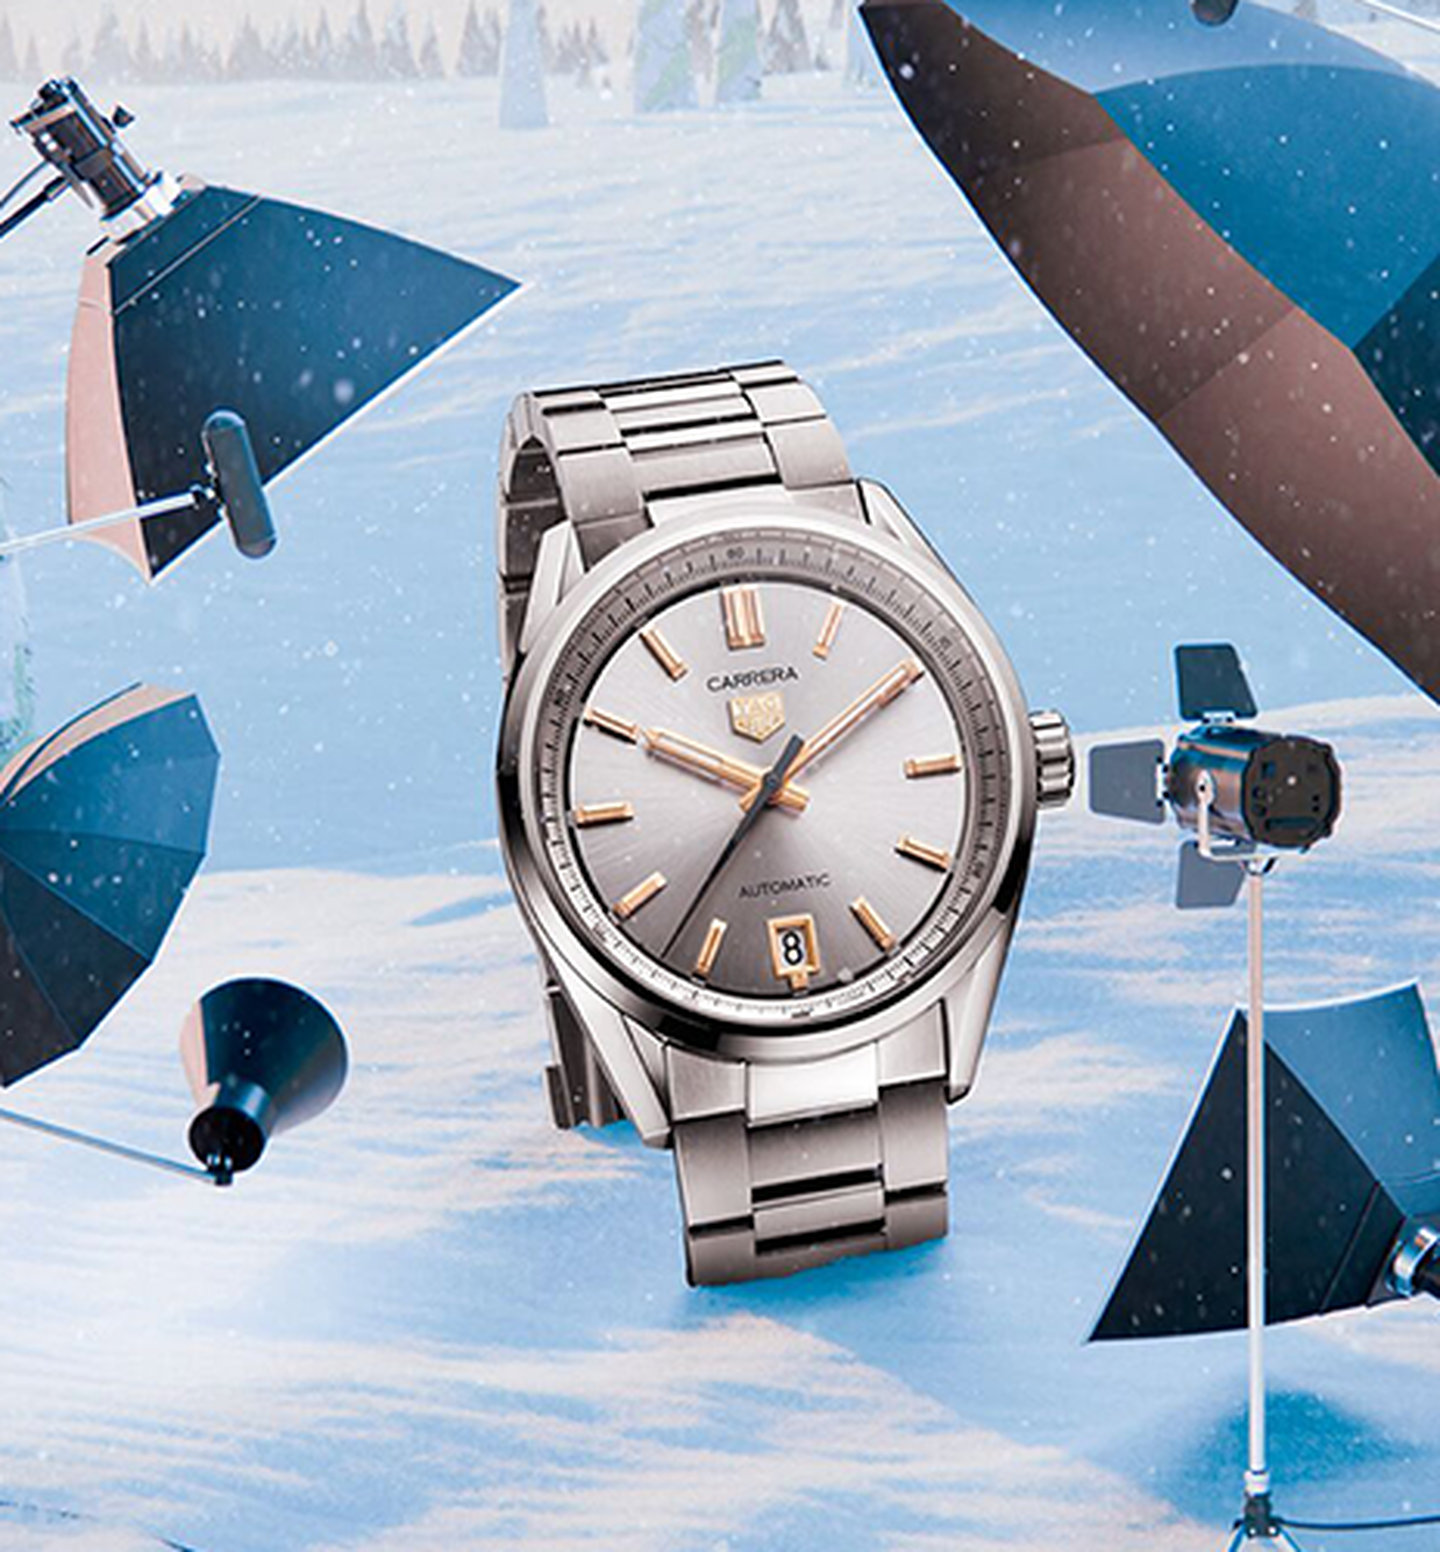 A TAG Heuer Carrera watch on a snowy background surrounded by spotlights.